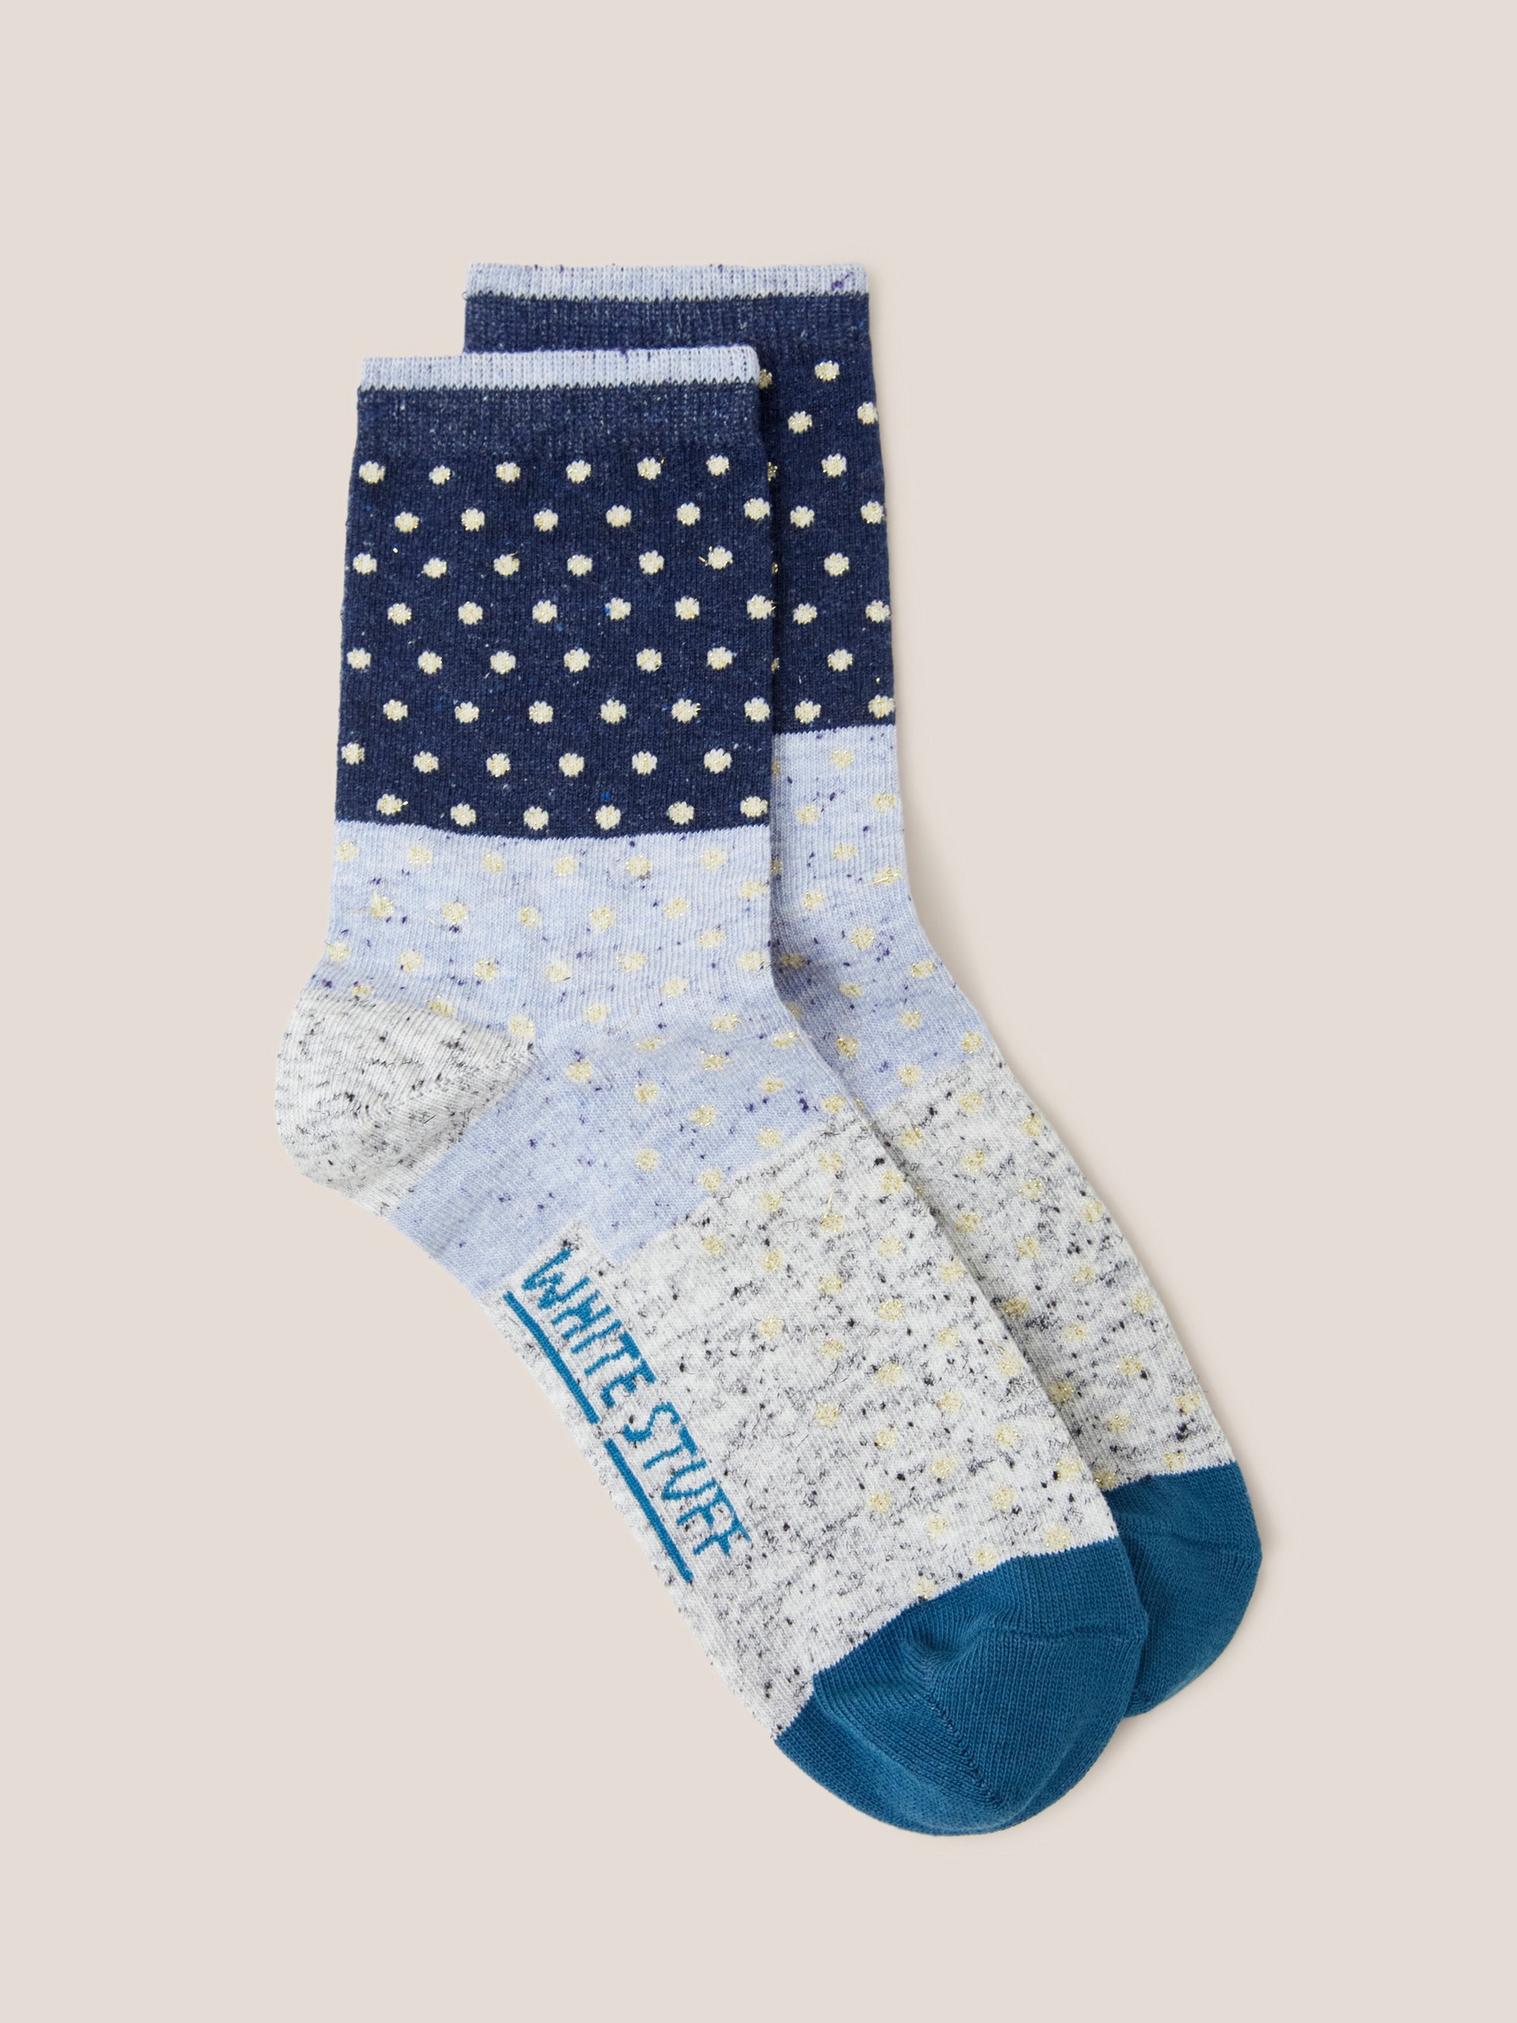 Nep Sparkle Ankle Socks in BLUE MLT - FLAT FRONT